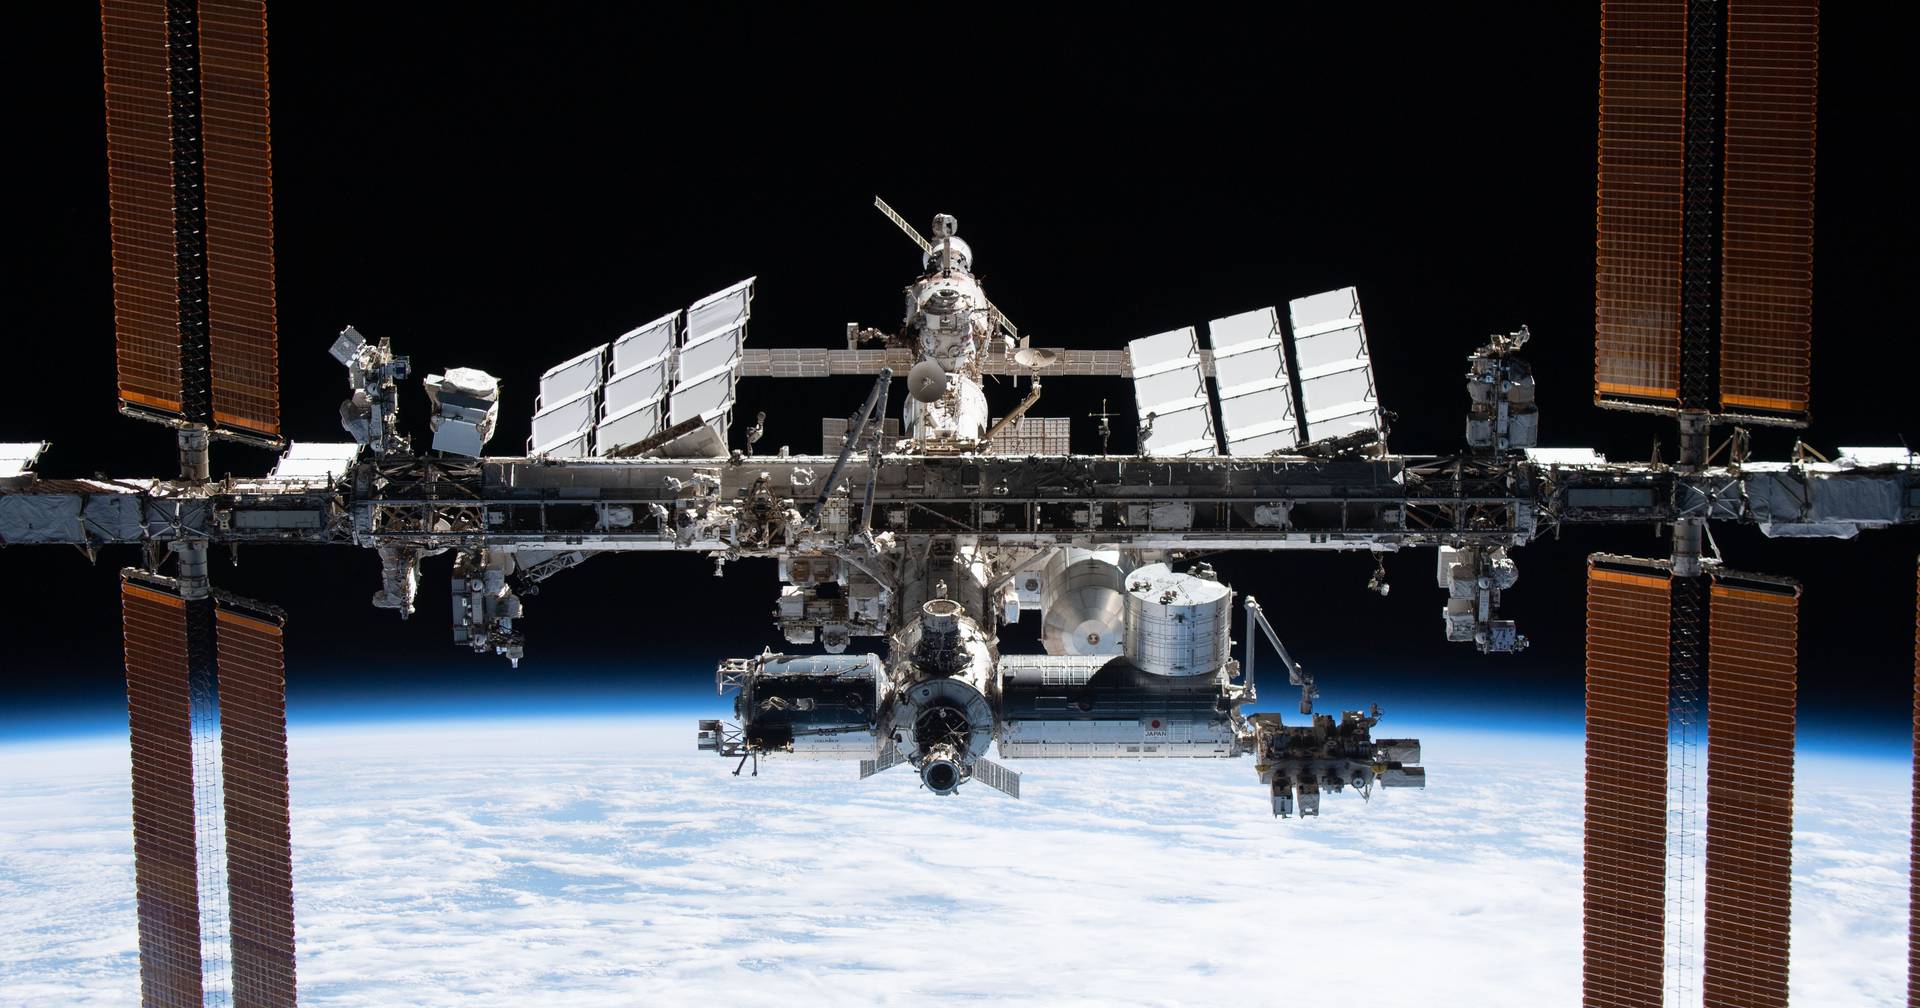 Russia and NASA Extend International Space Station (ISS) Flight Program to 2025